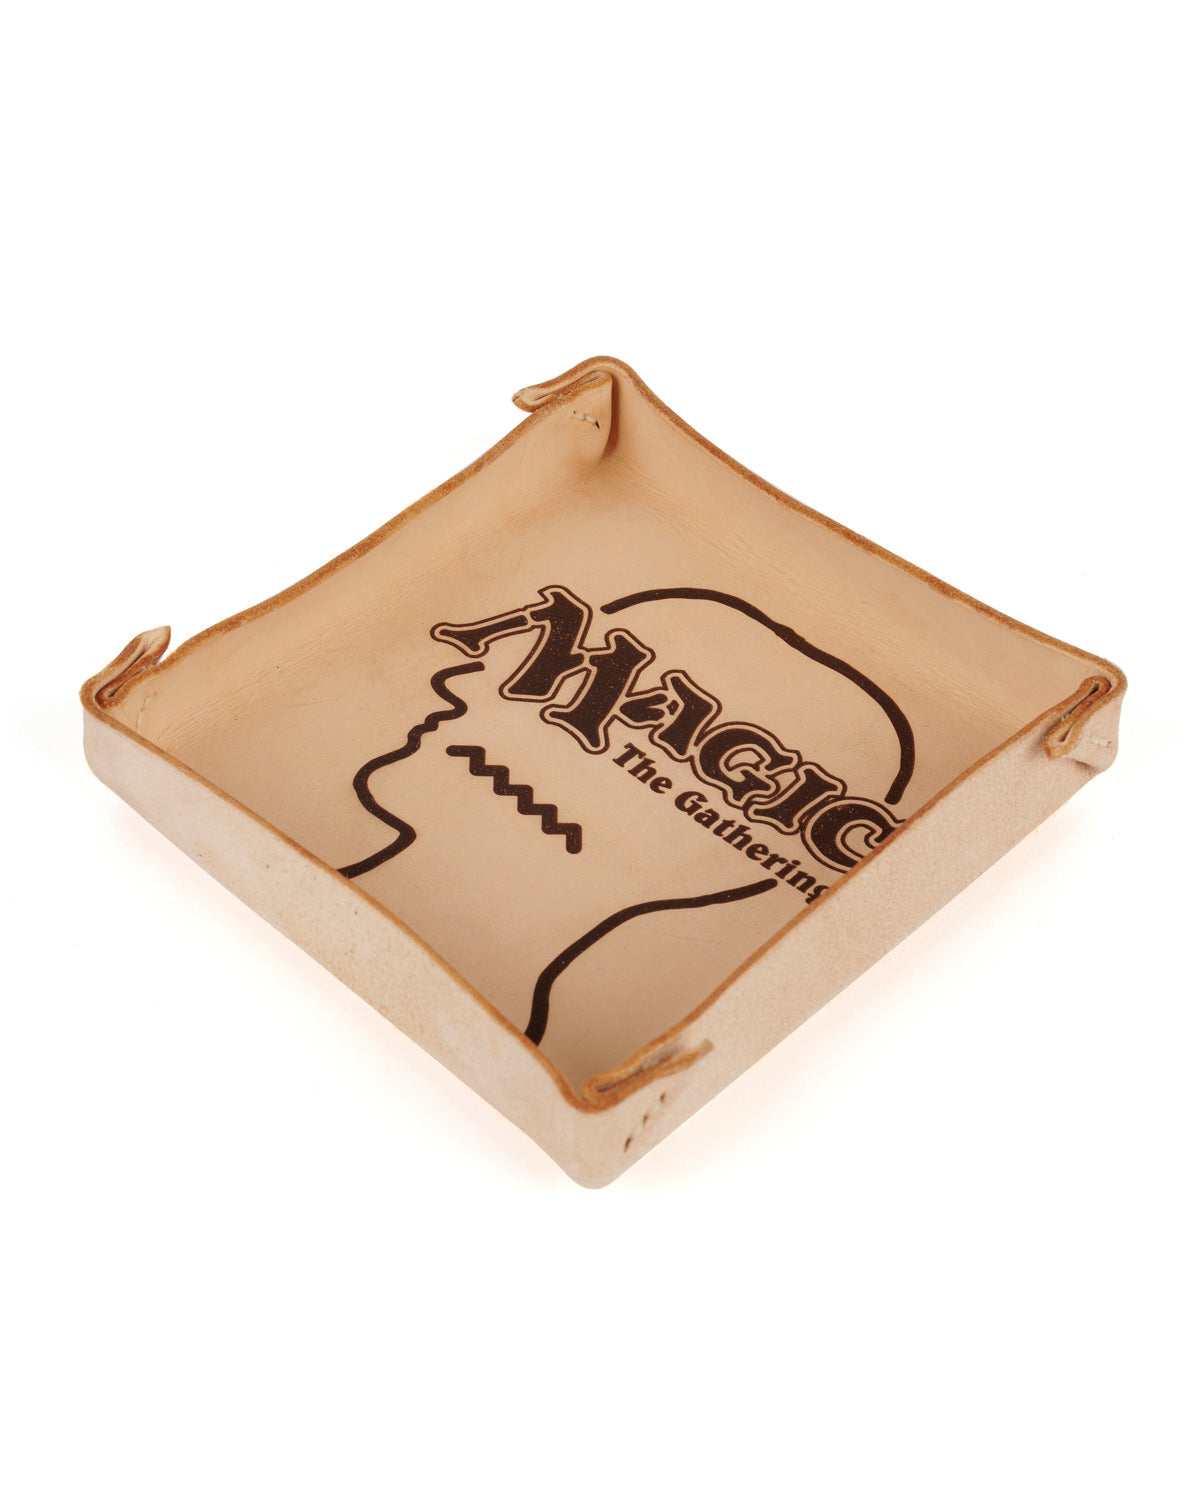 Brain Dead x Magic: The Gathering x Alterior Dice Tray - Natural Tanned Leather 4